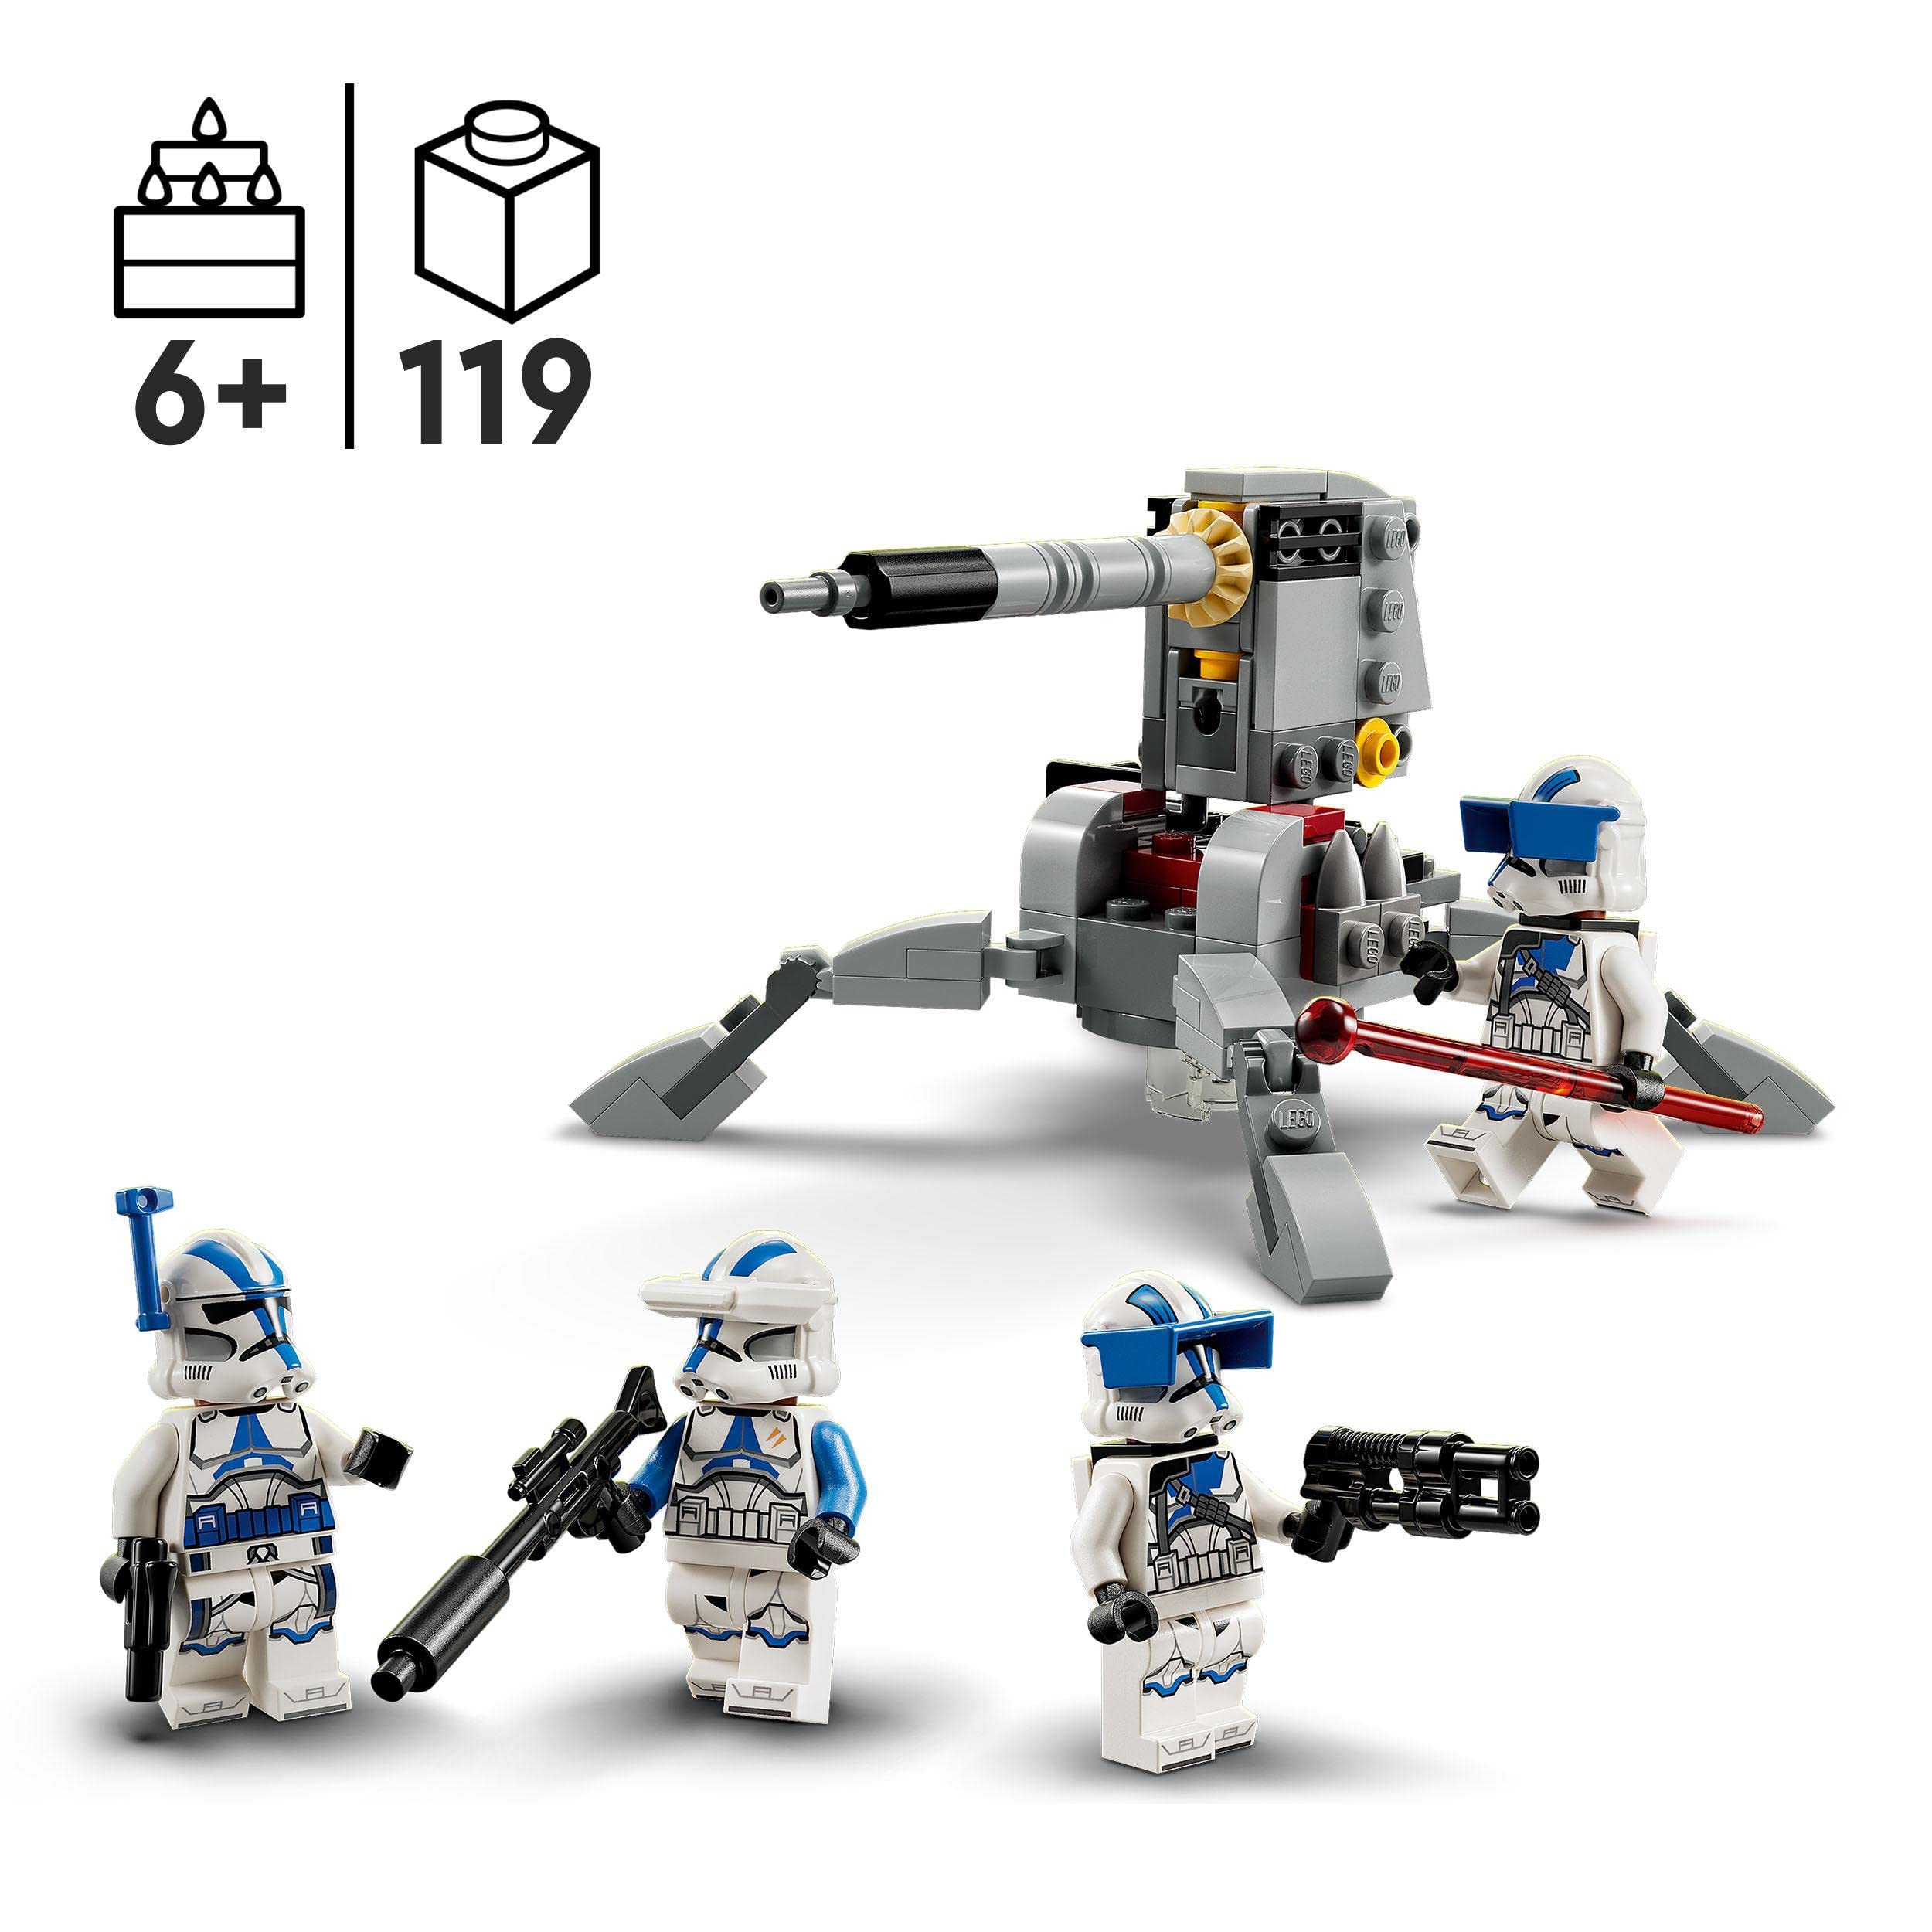 LEGO Star Wars 501st Clone Troopers Battle Pack Set, Buildable Toy with AV-7 Anti Vehicle Cannon and Spring Loaded Shooter plus 4 Characters 75345